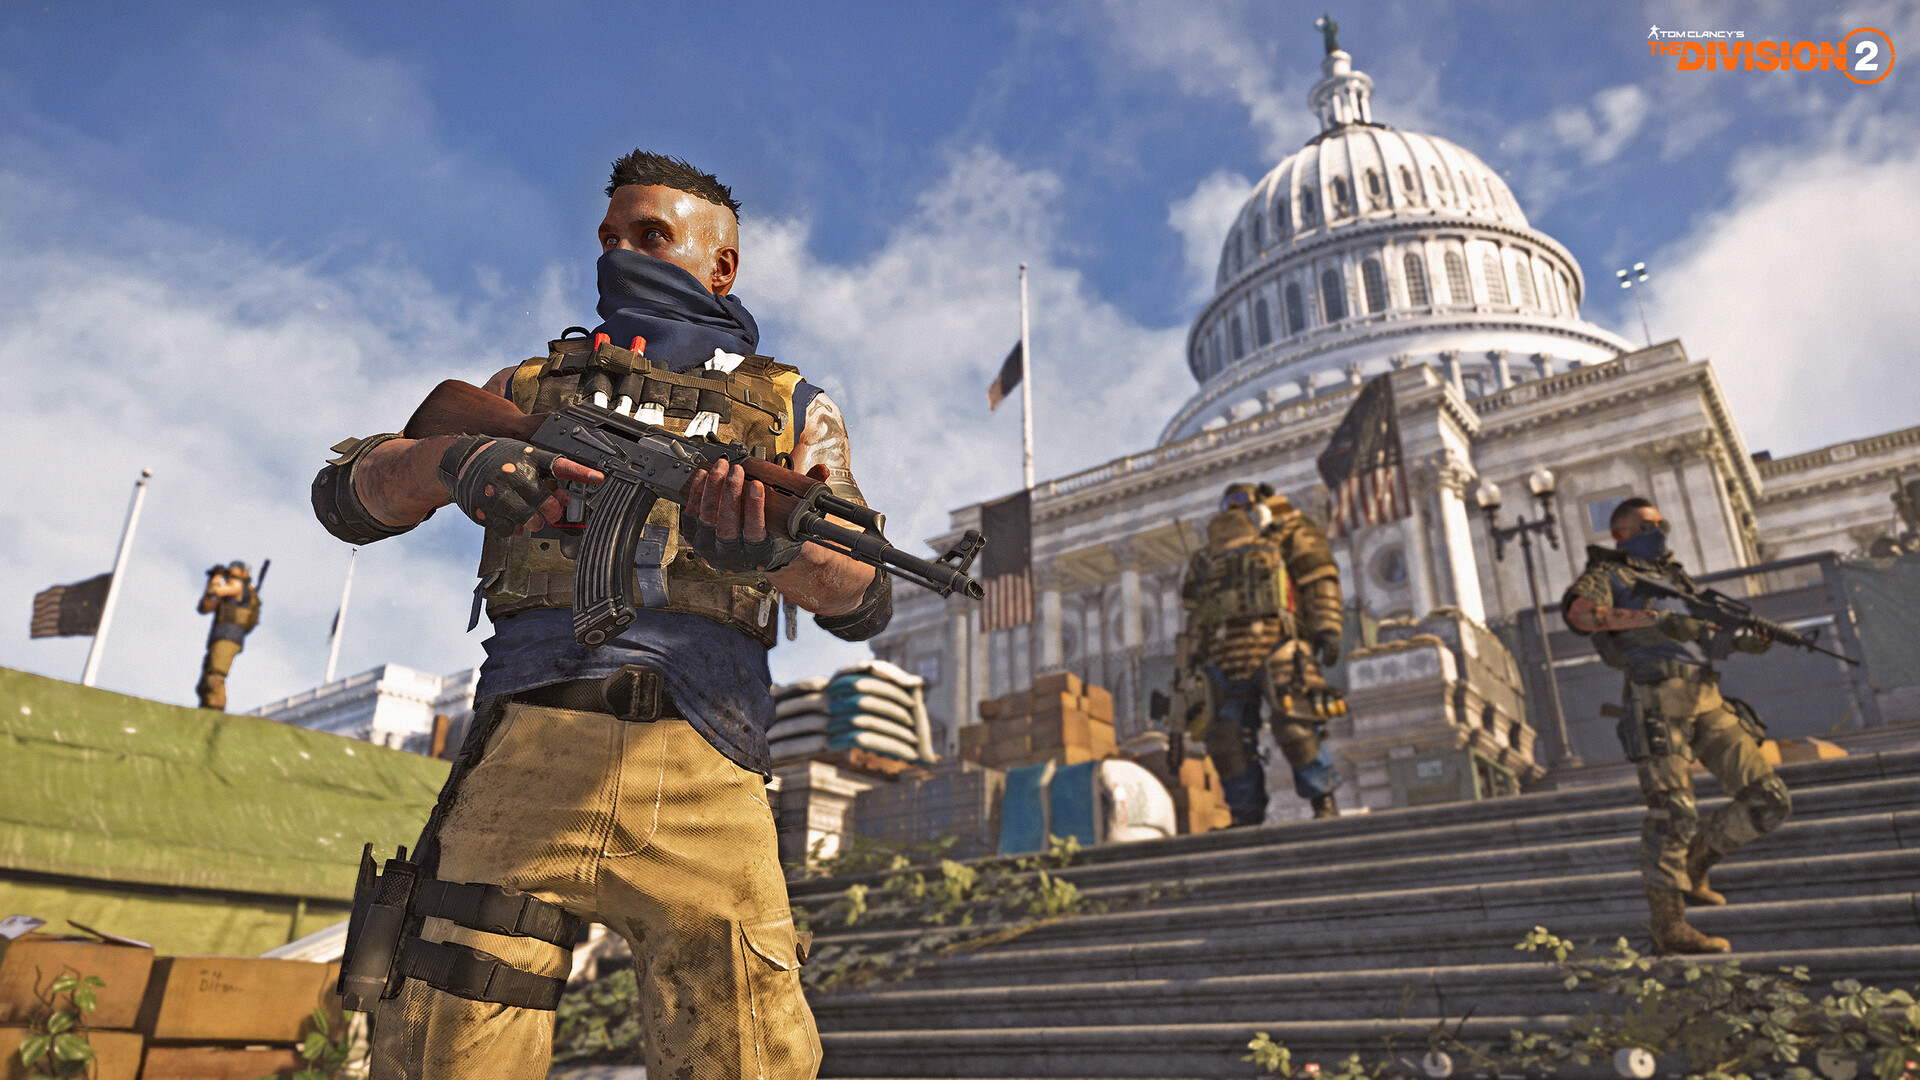 where to buy the division 2